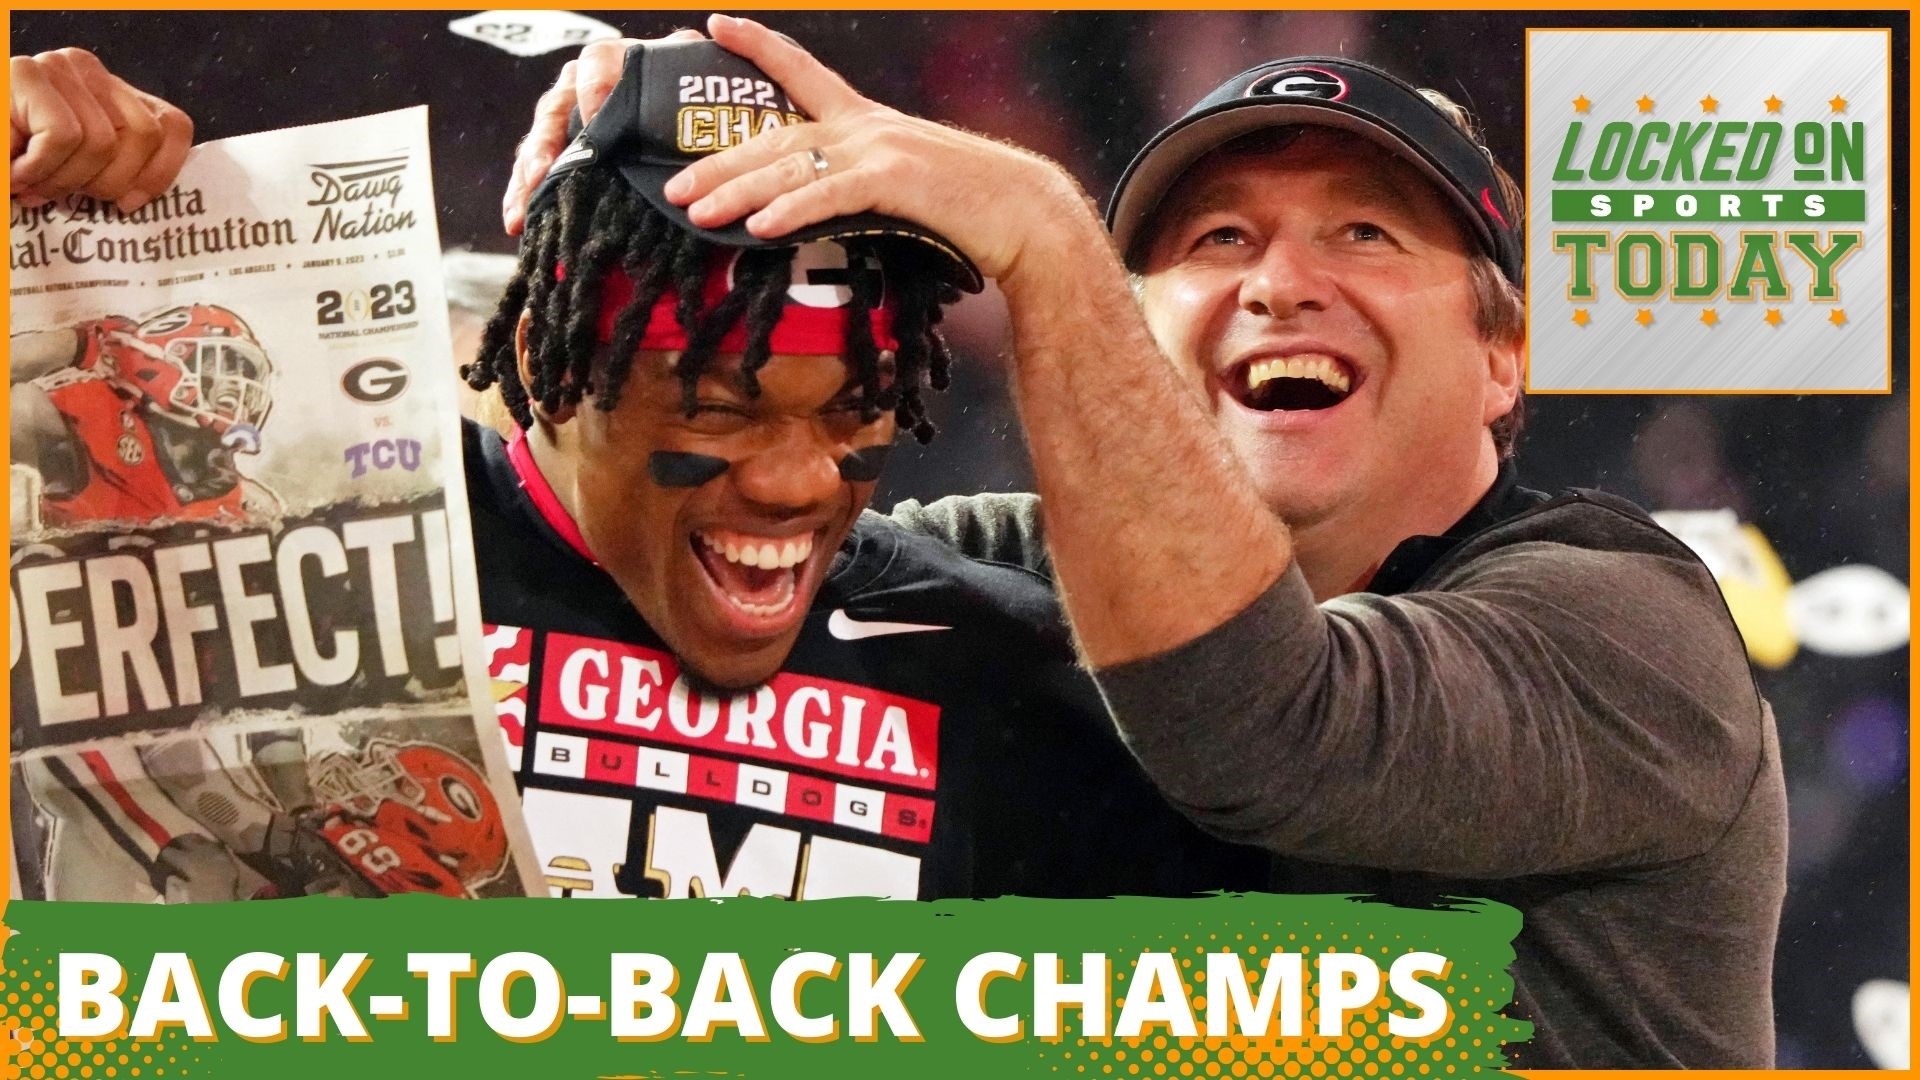 Discussing the day's top sports stories from the Georgia Bulldogs becoming back-to-back champs to the Seahawks quarterback advantage for the playoffs.